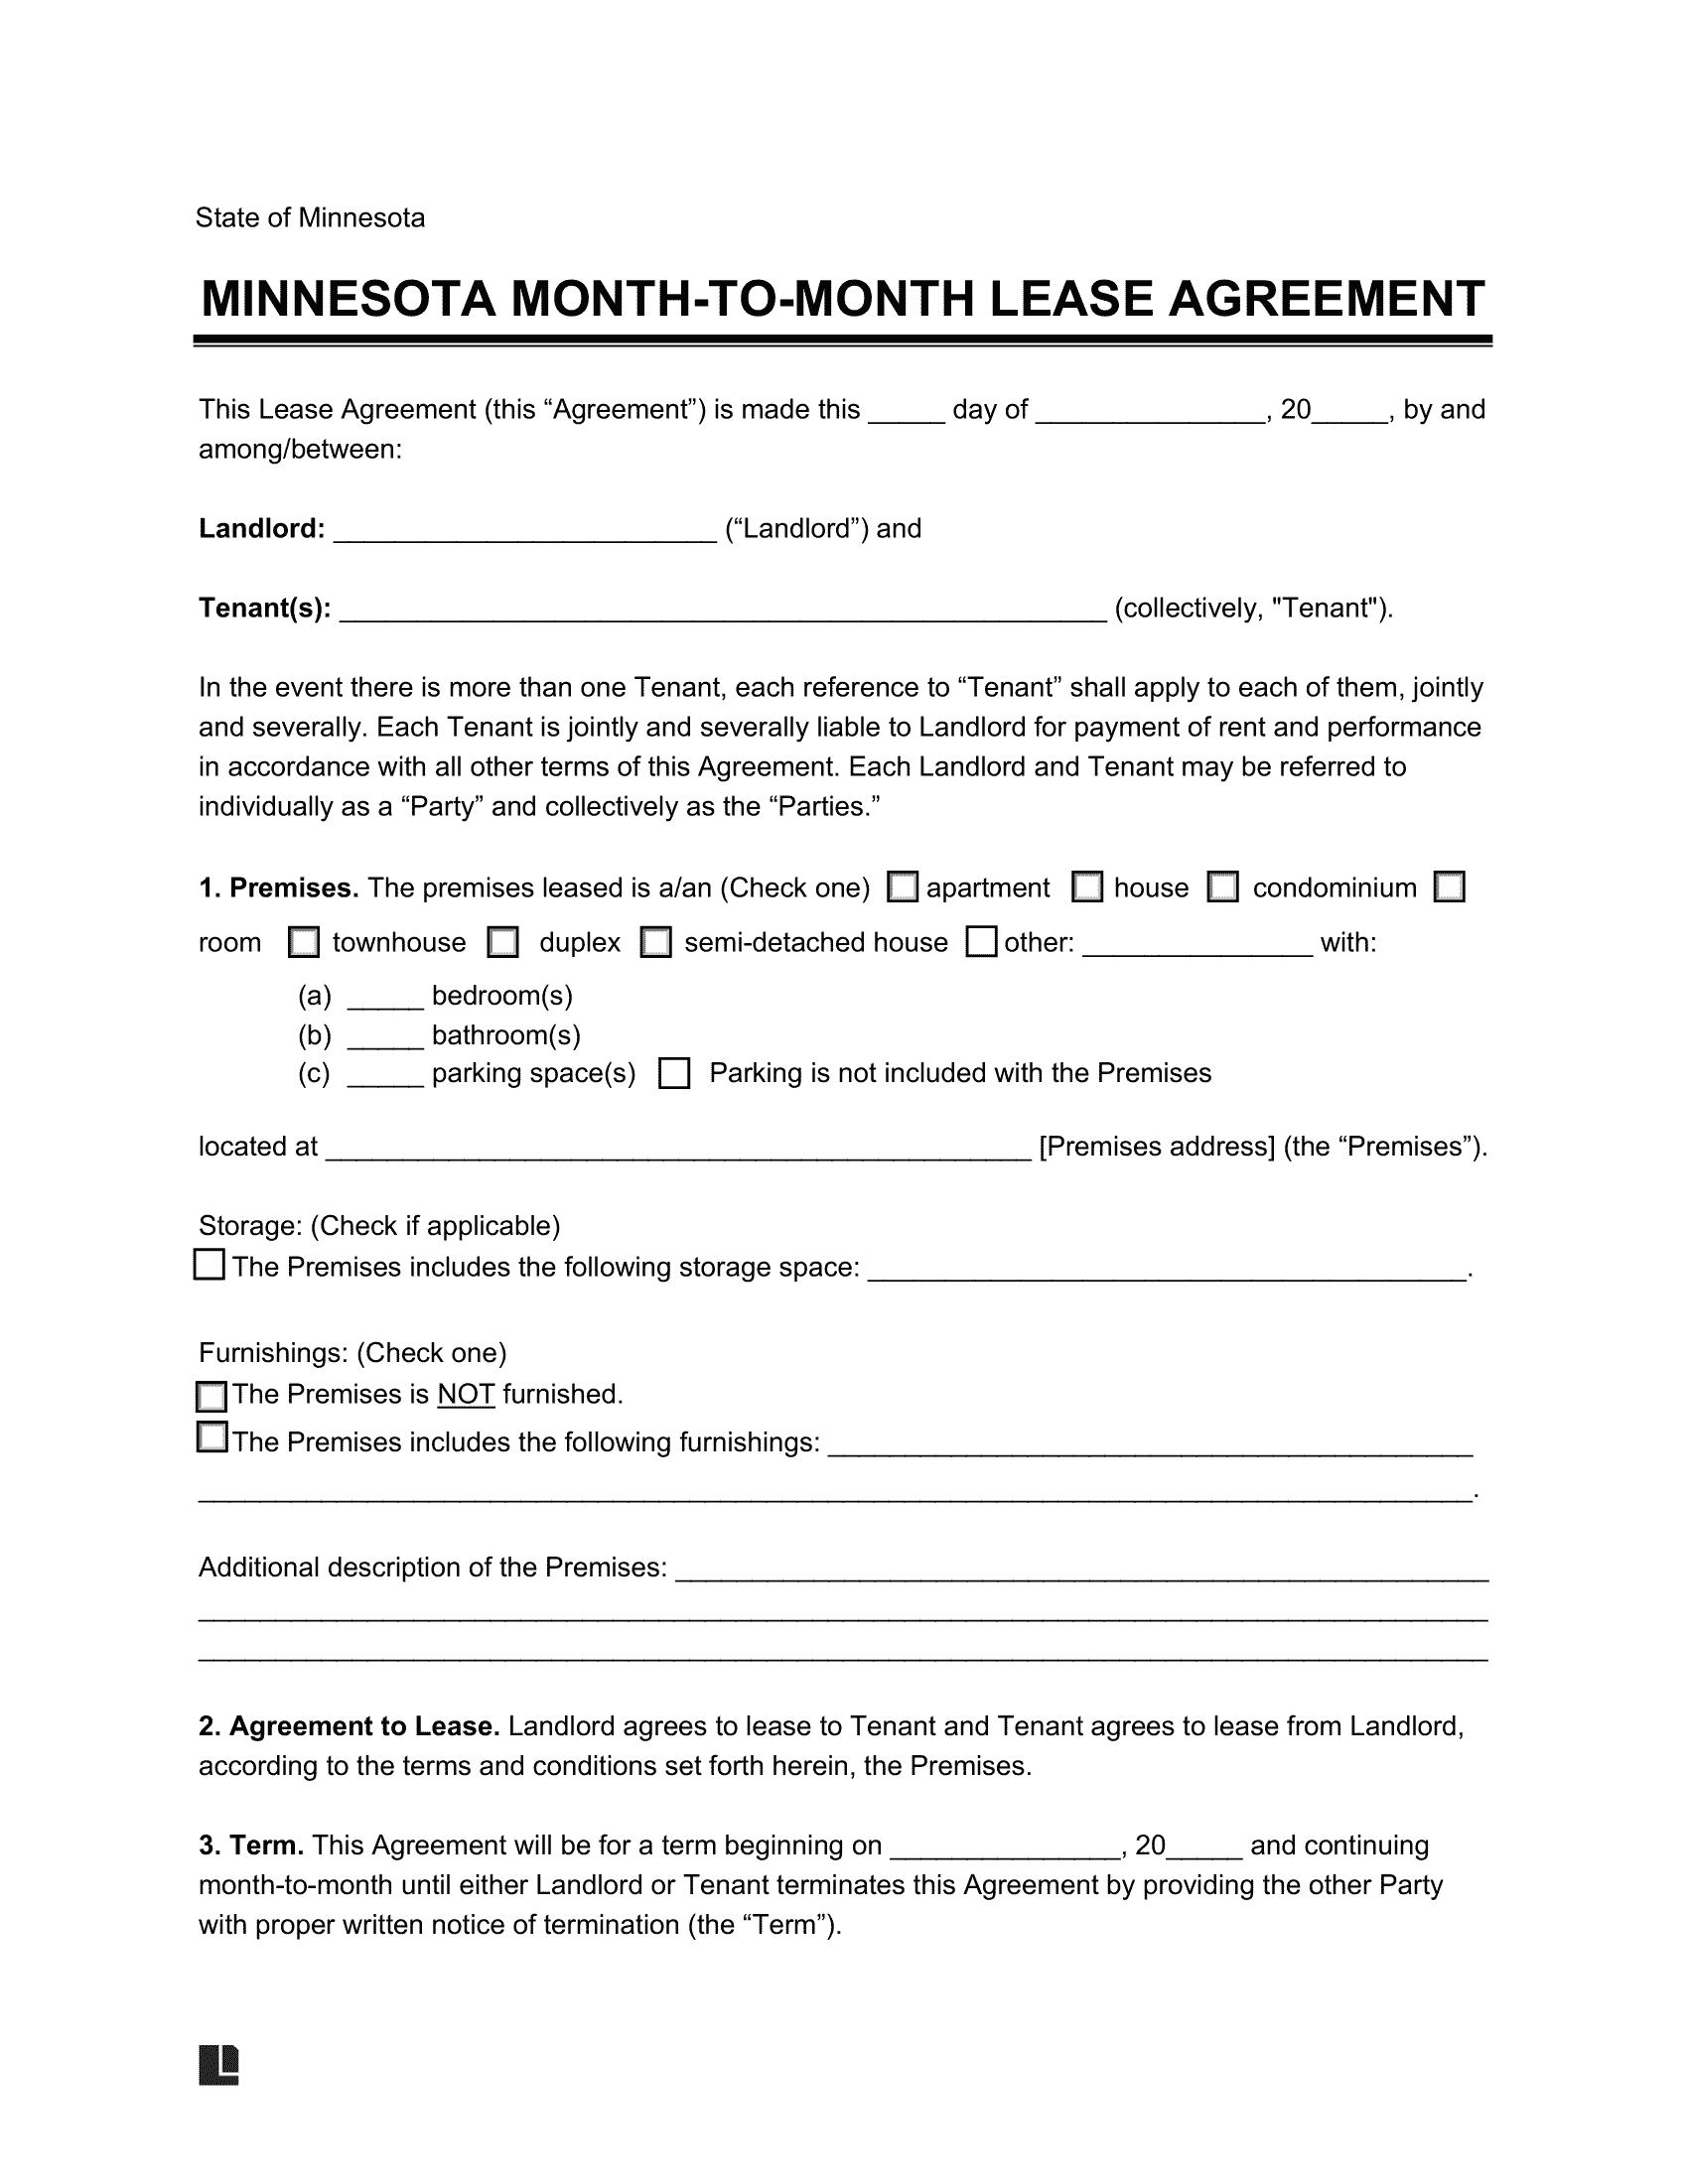 Minnesota Month-to-Month Rental Agreement